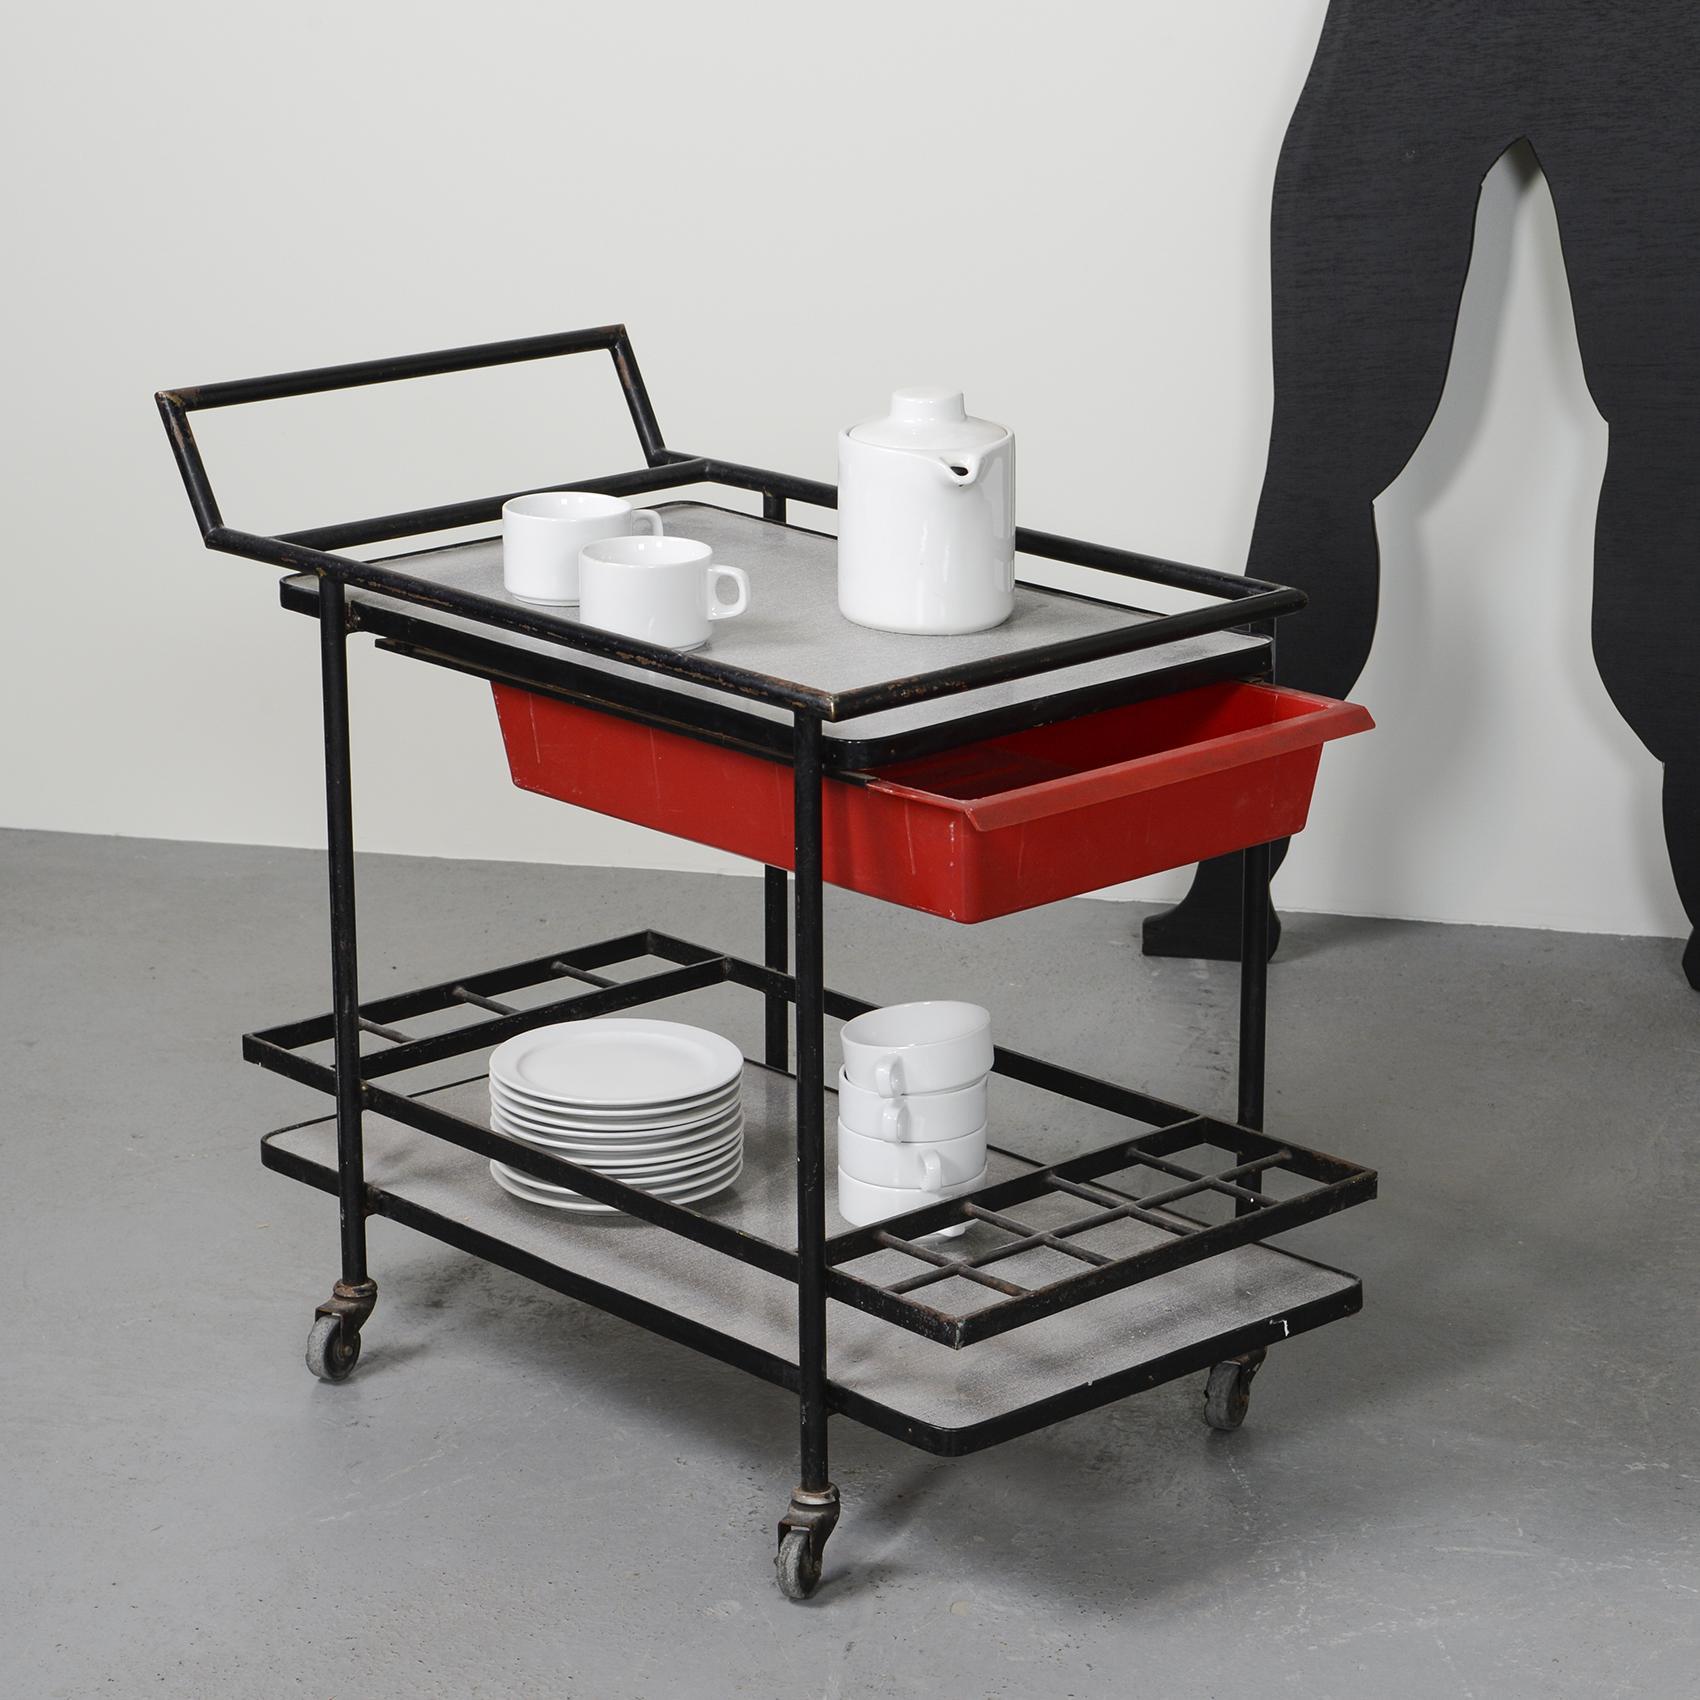 Trolley with two levels, square tubular structure in black lacquered metal with bottle compartments on the bottom shelf and a drawer in red moulded plastic by Charlotte Perriand.

The drawer is marked Modèle de Charlotte PERRIAND Breveté S.G.D.G.